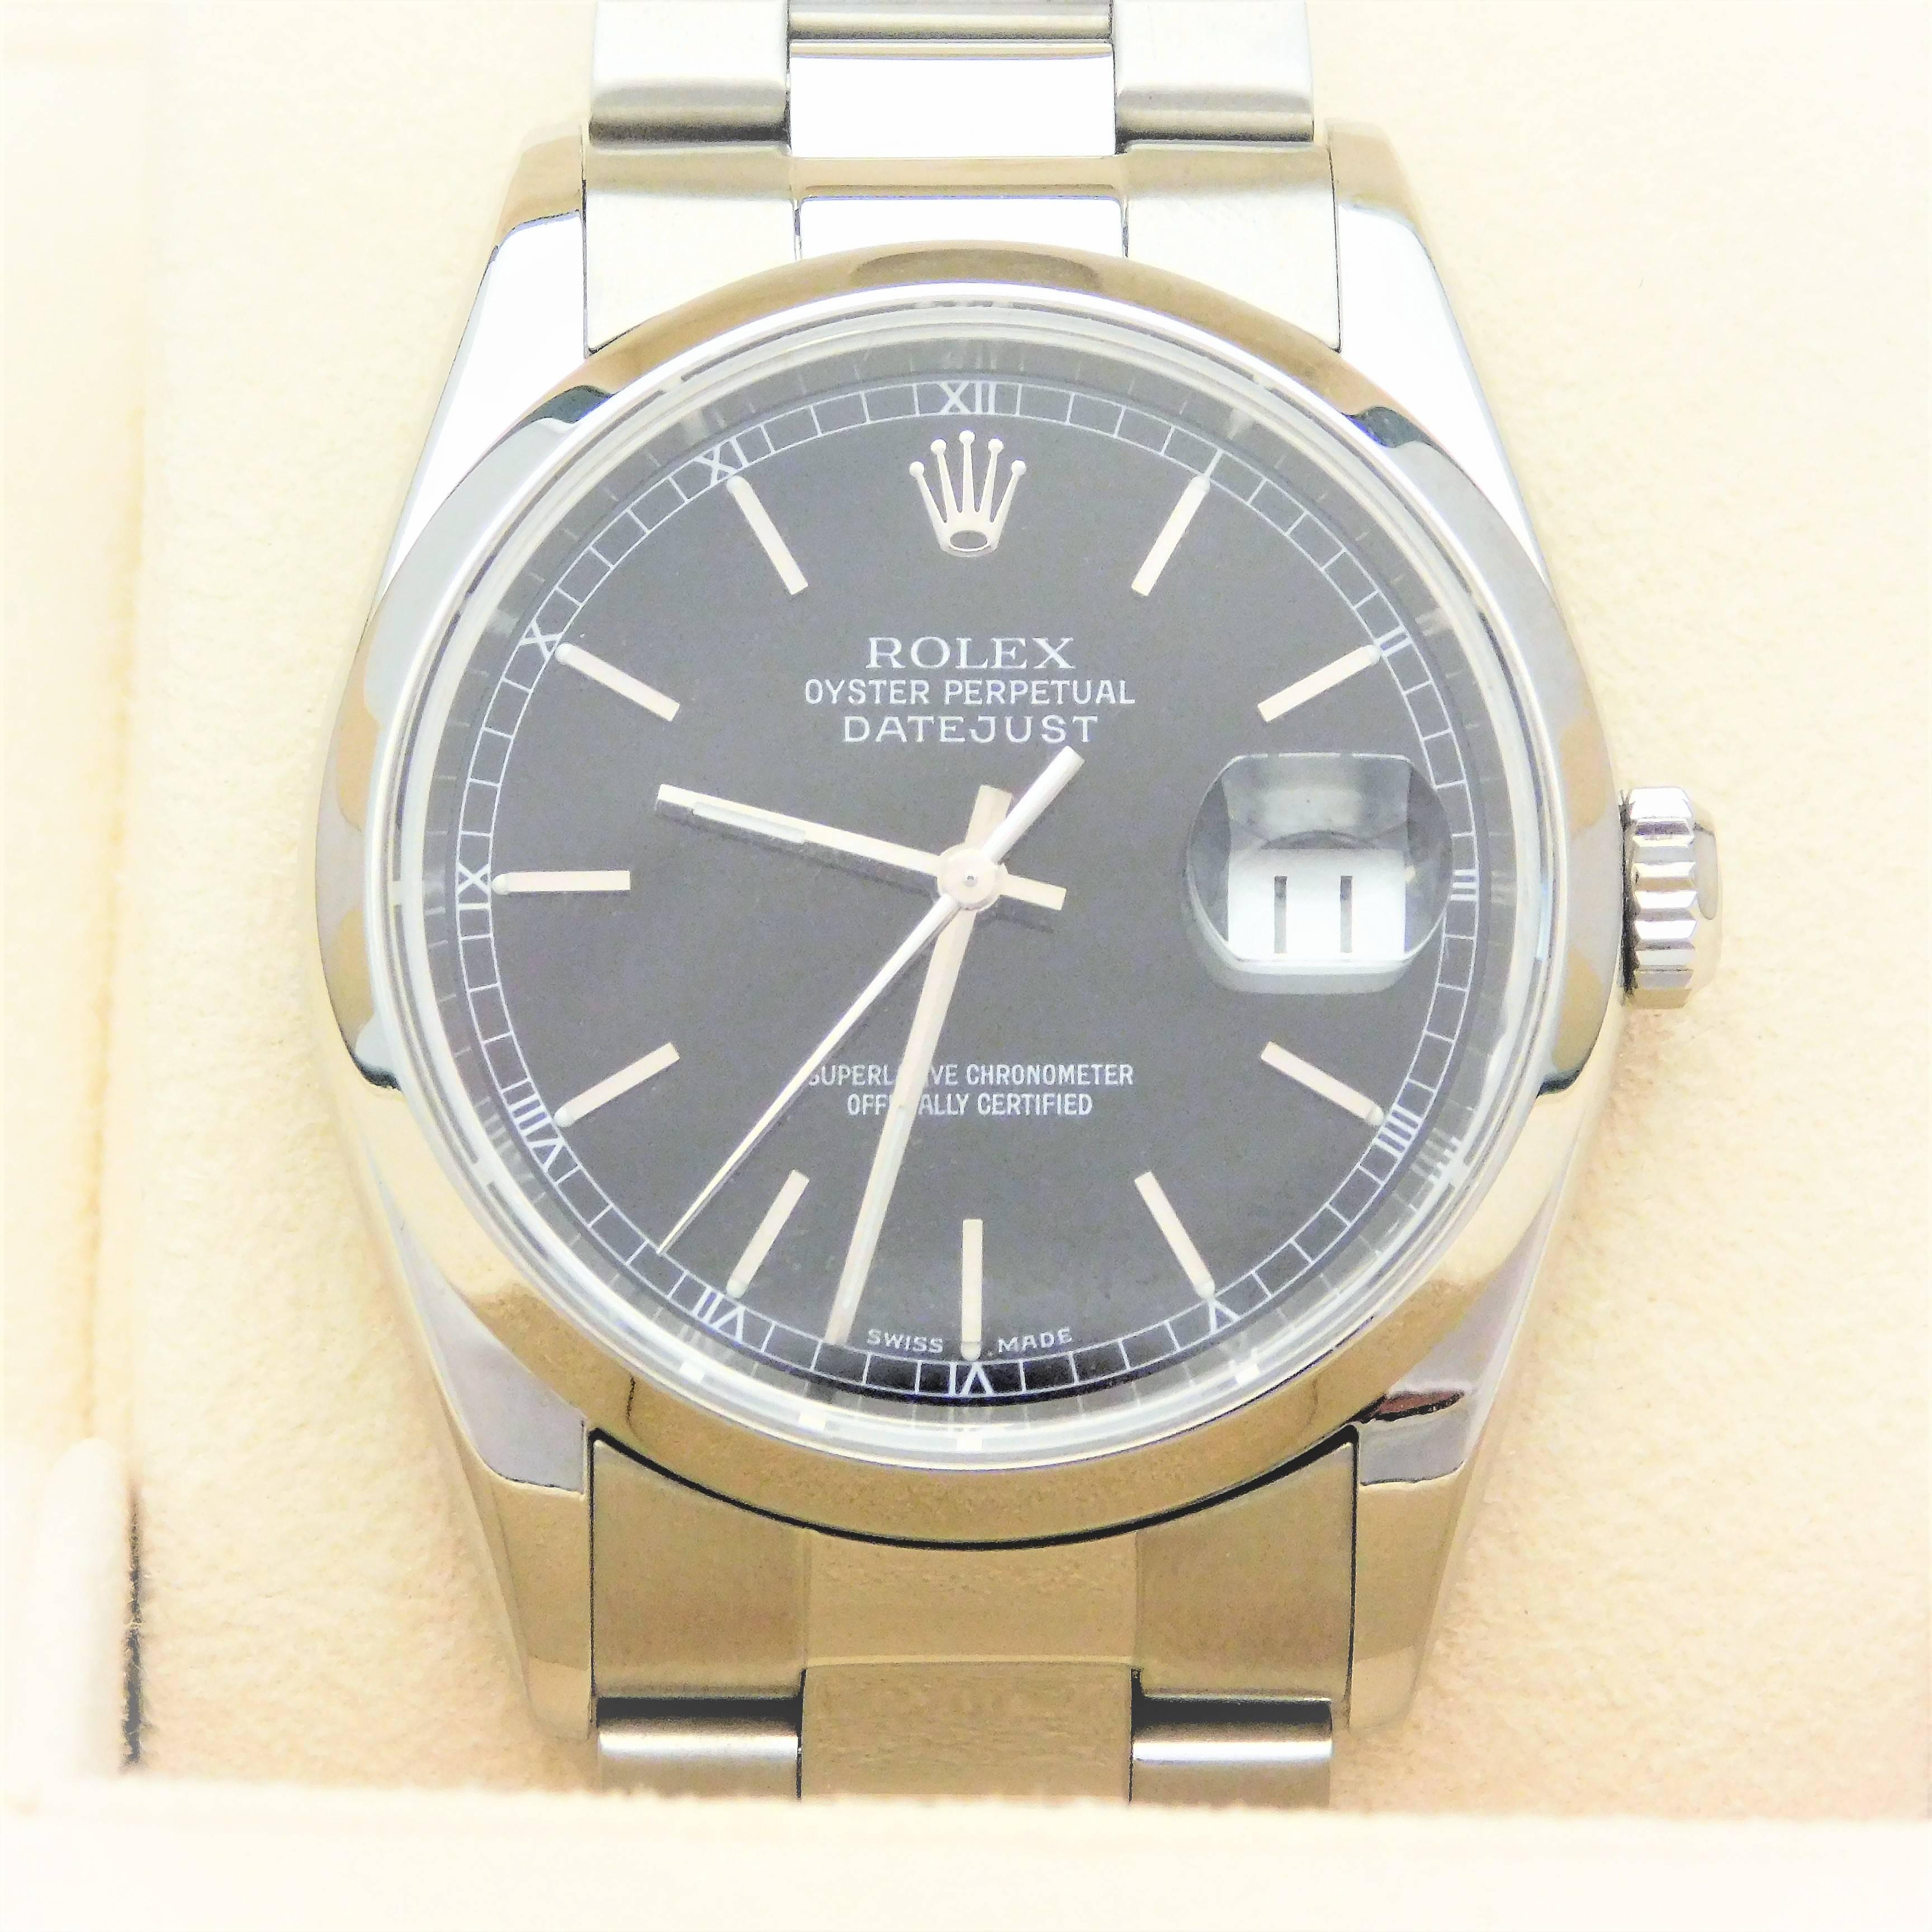 Circa 2005.  Excellent condition and barely worn.  This Rolex Oyster Perpetual Date Just is in perfect working order.  The Rolex Date Oyster Perpetual is one of the most sought-after men’s luxury time pieces in the world.  It is a symbol of status. 